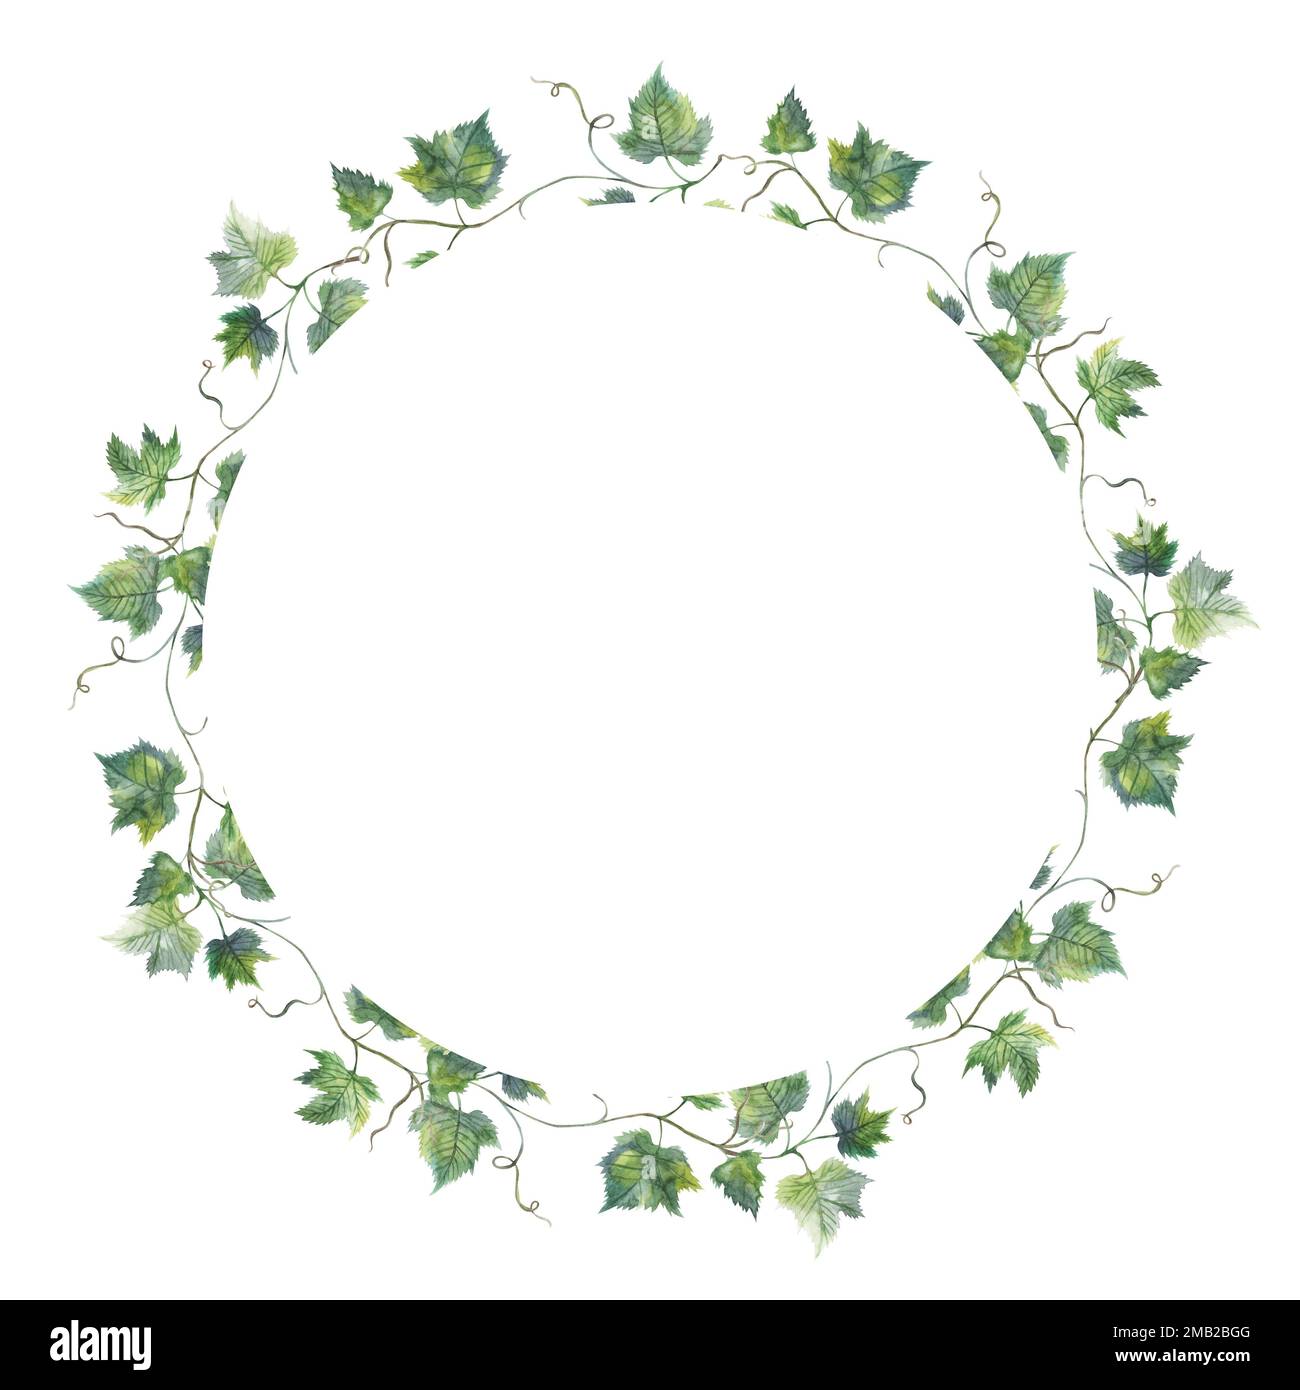 Grapevine leaf grapes wreath circle watercolor illustration hand painted Stock Photo